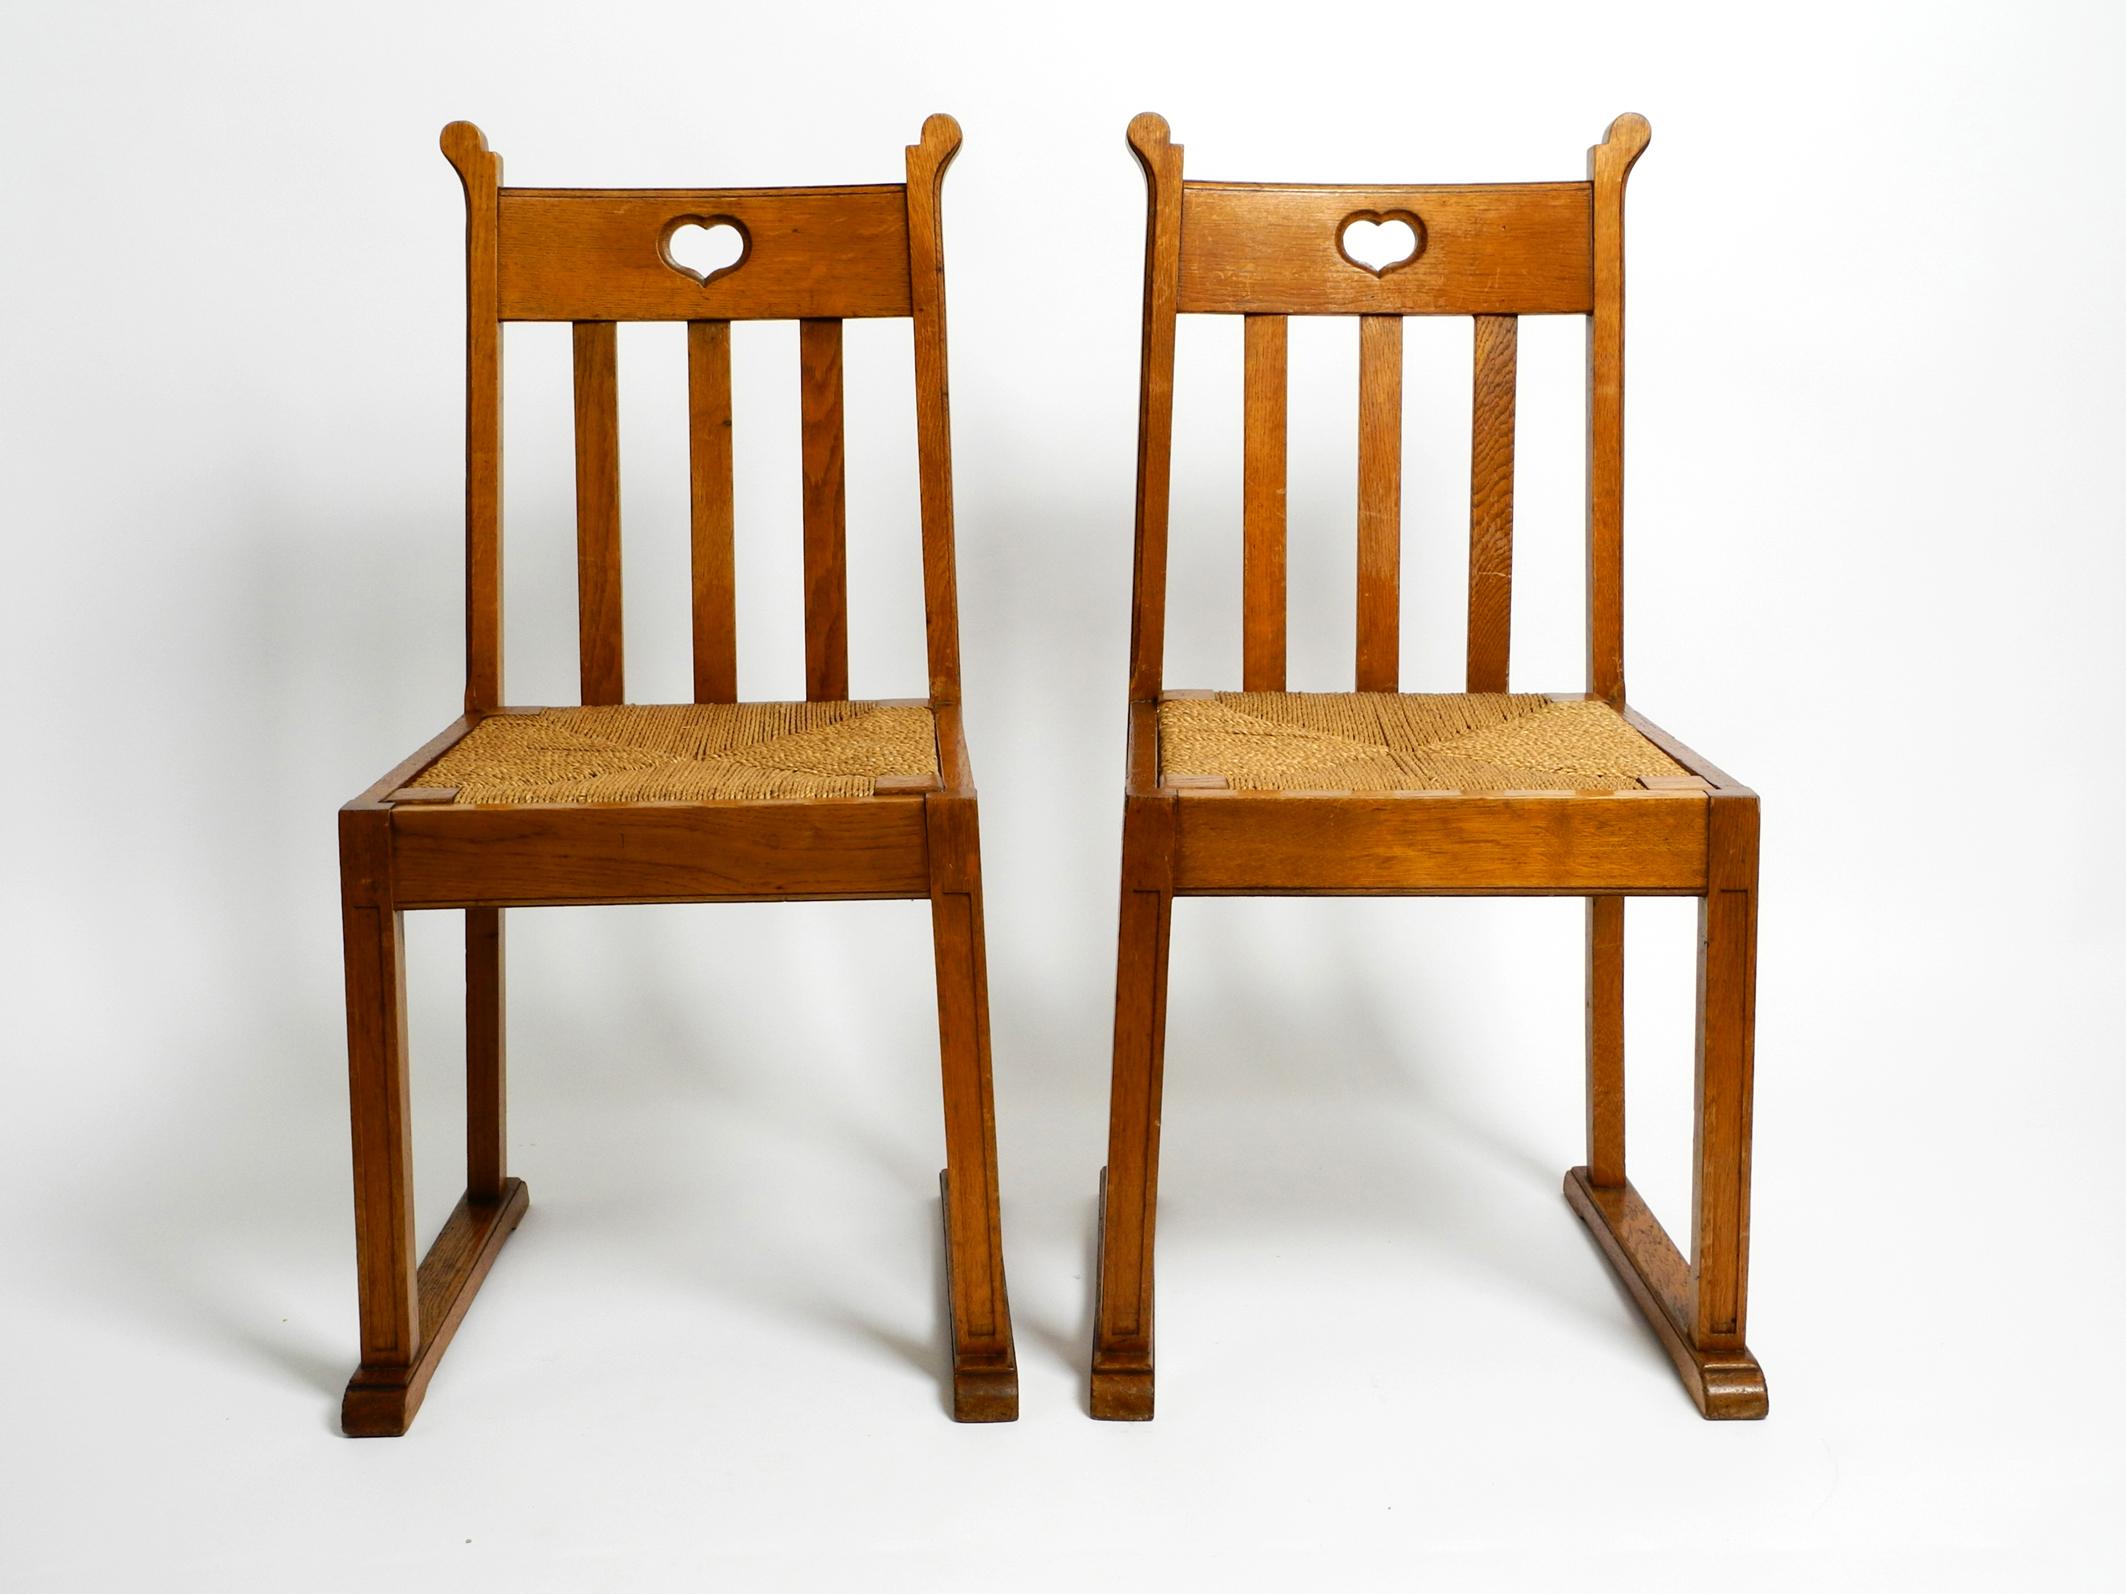 One pair of beautiful, very rare Mid Century solid oak chairs with skid base. The seats are made of raffia.
High quality solid production with many details.
With a gorgeous patina. Undamaged and 100% original condition.
No woodworm damages. No